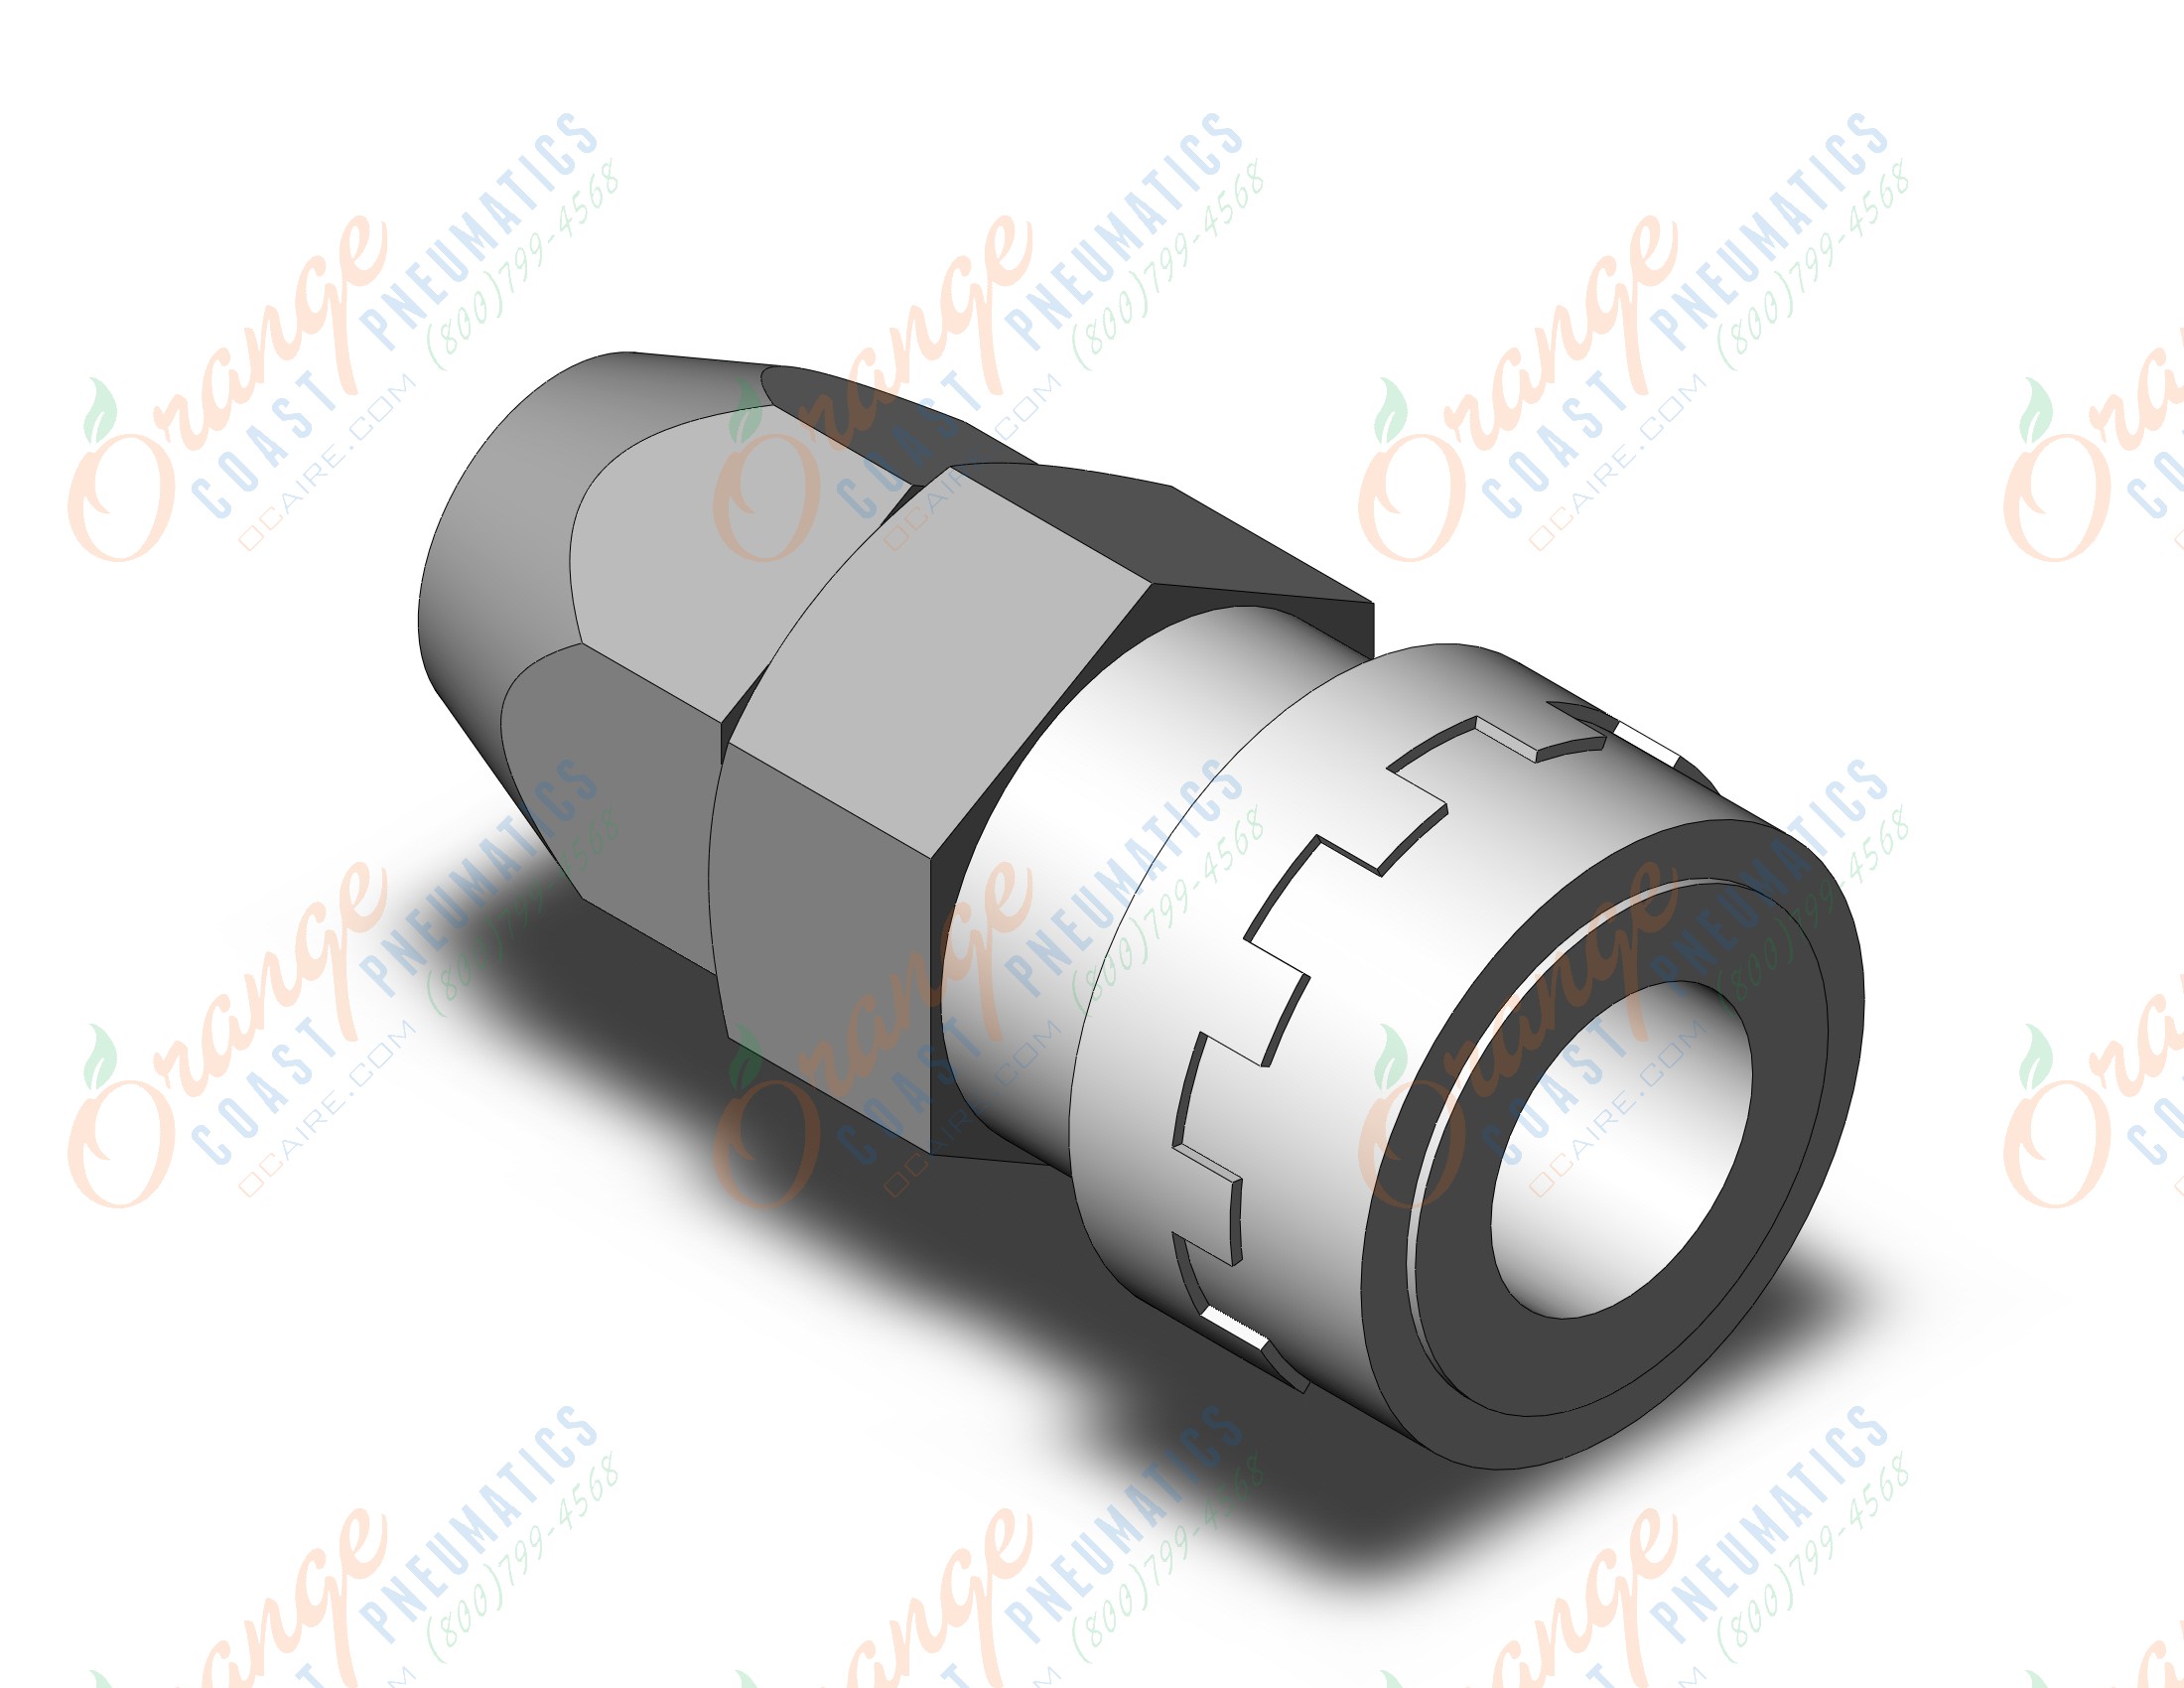 SMC KK130S-80N s coupler, w/nut fitting, KK13 S COUPLERS (sold in packages of 5; price is per piece)